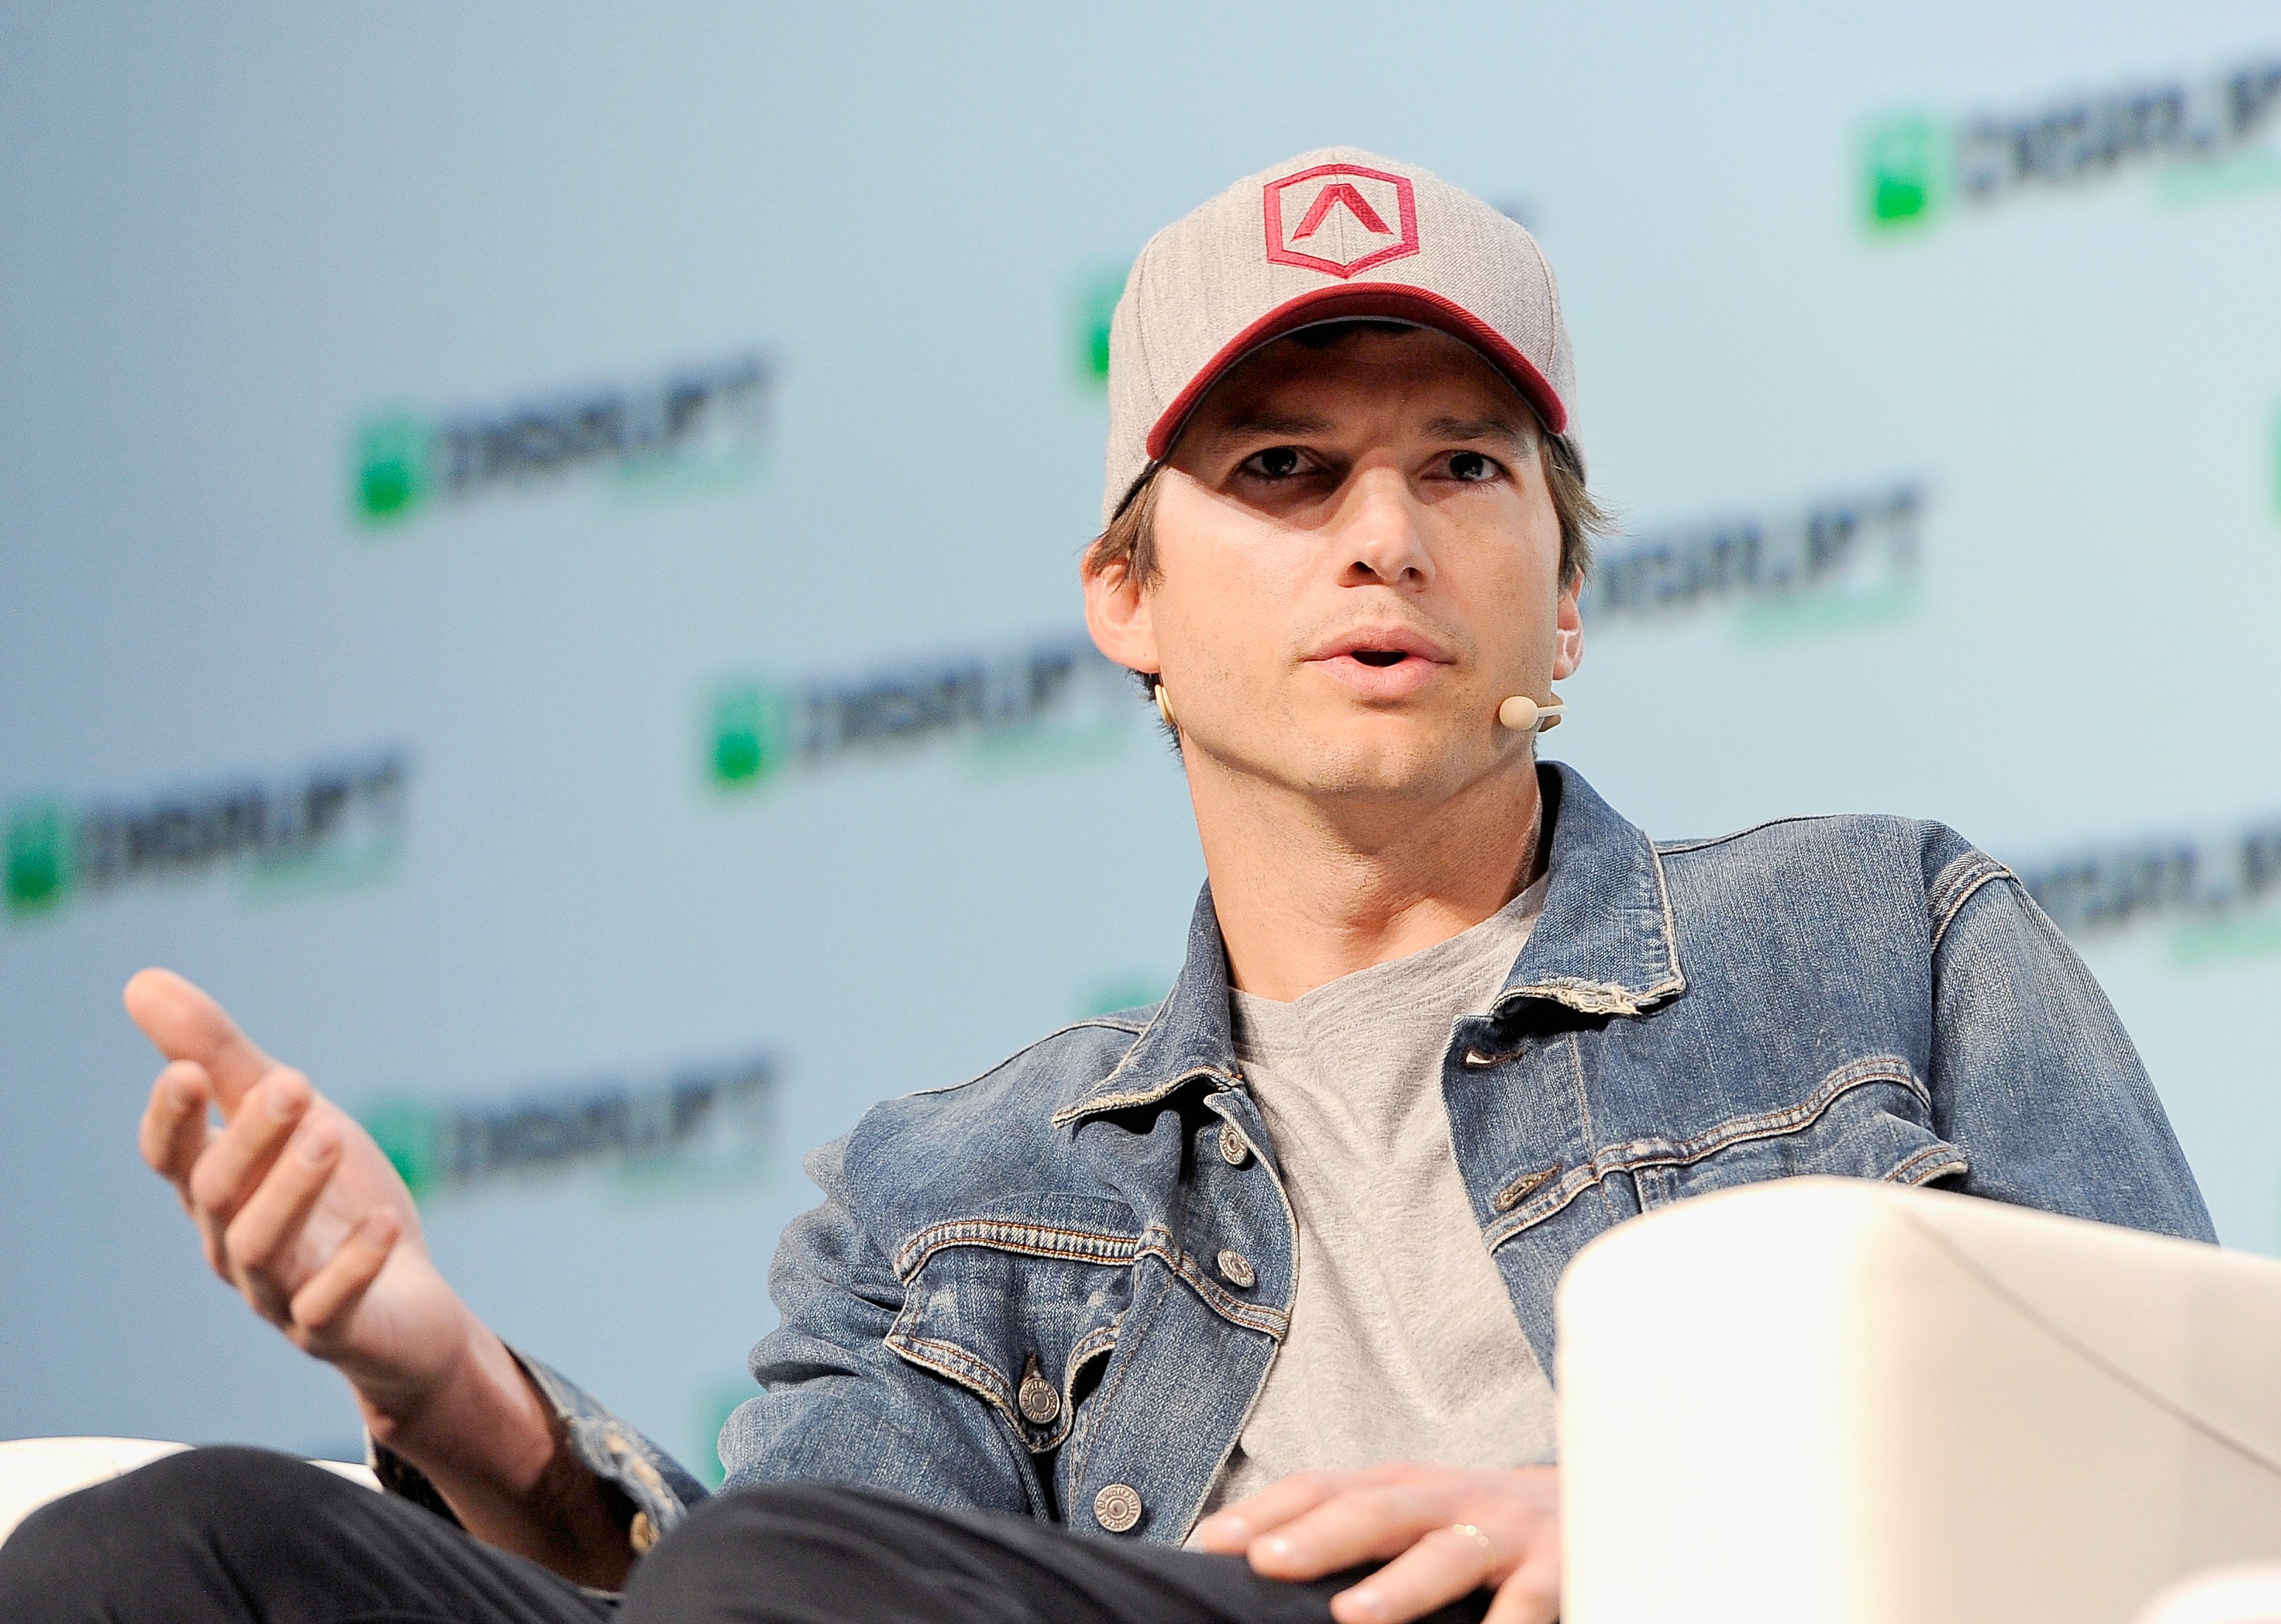 Sound Ventures Founder Ashton Kutcher speaks onstage at Day 1 of TechCrunch Disrupt SF 2018 at Moscone Center on September 5, 2018 | Source: Getty Images